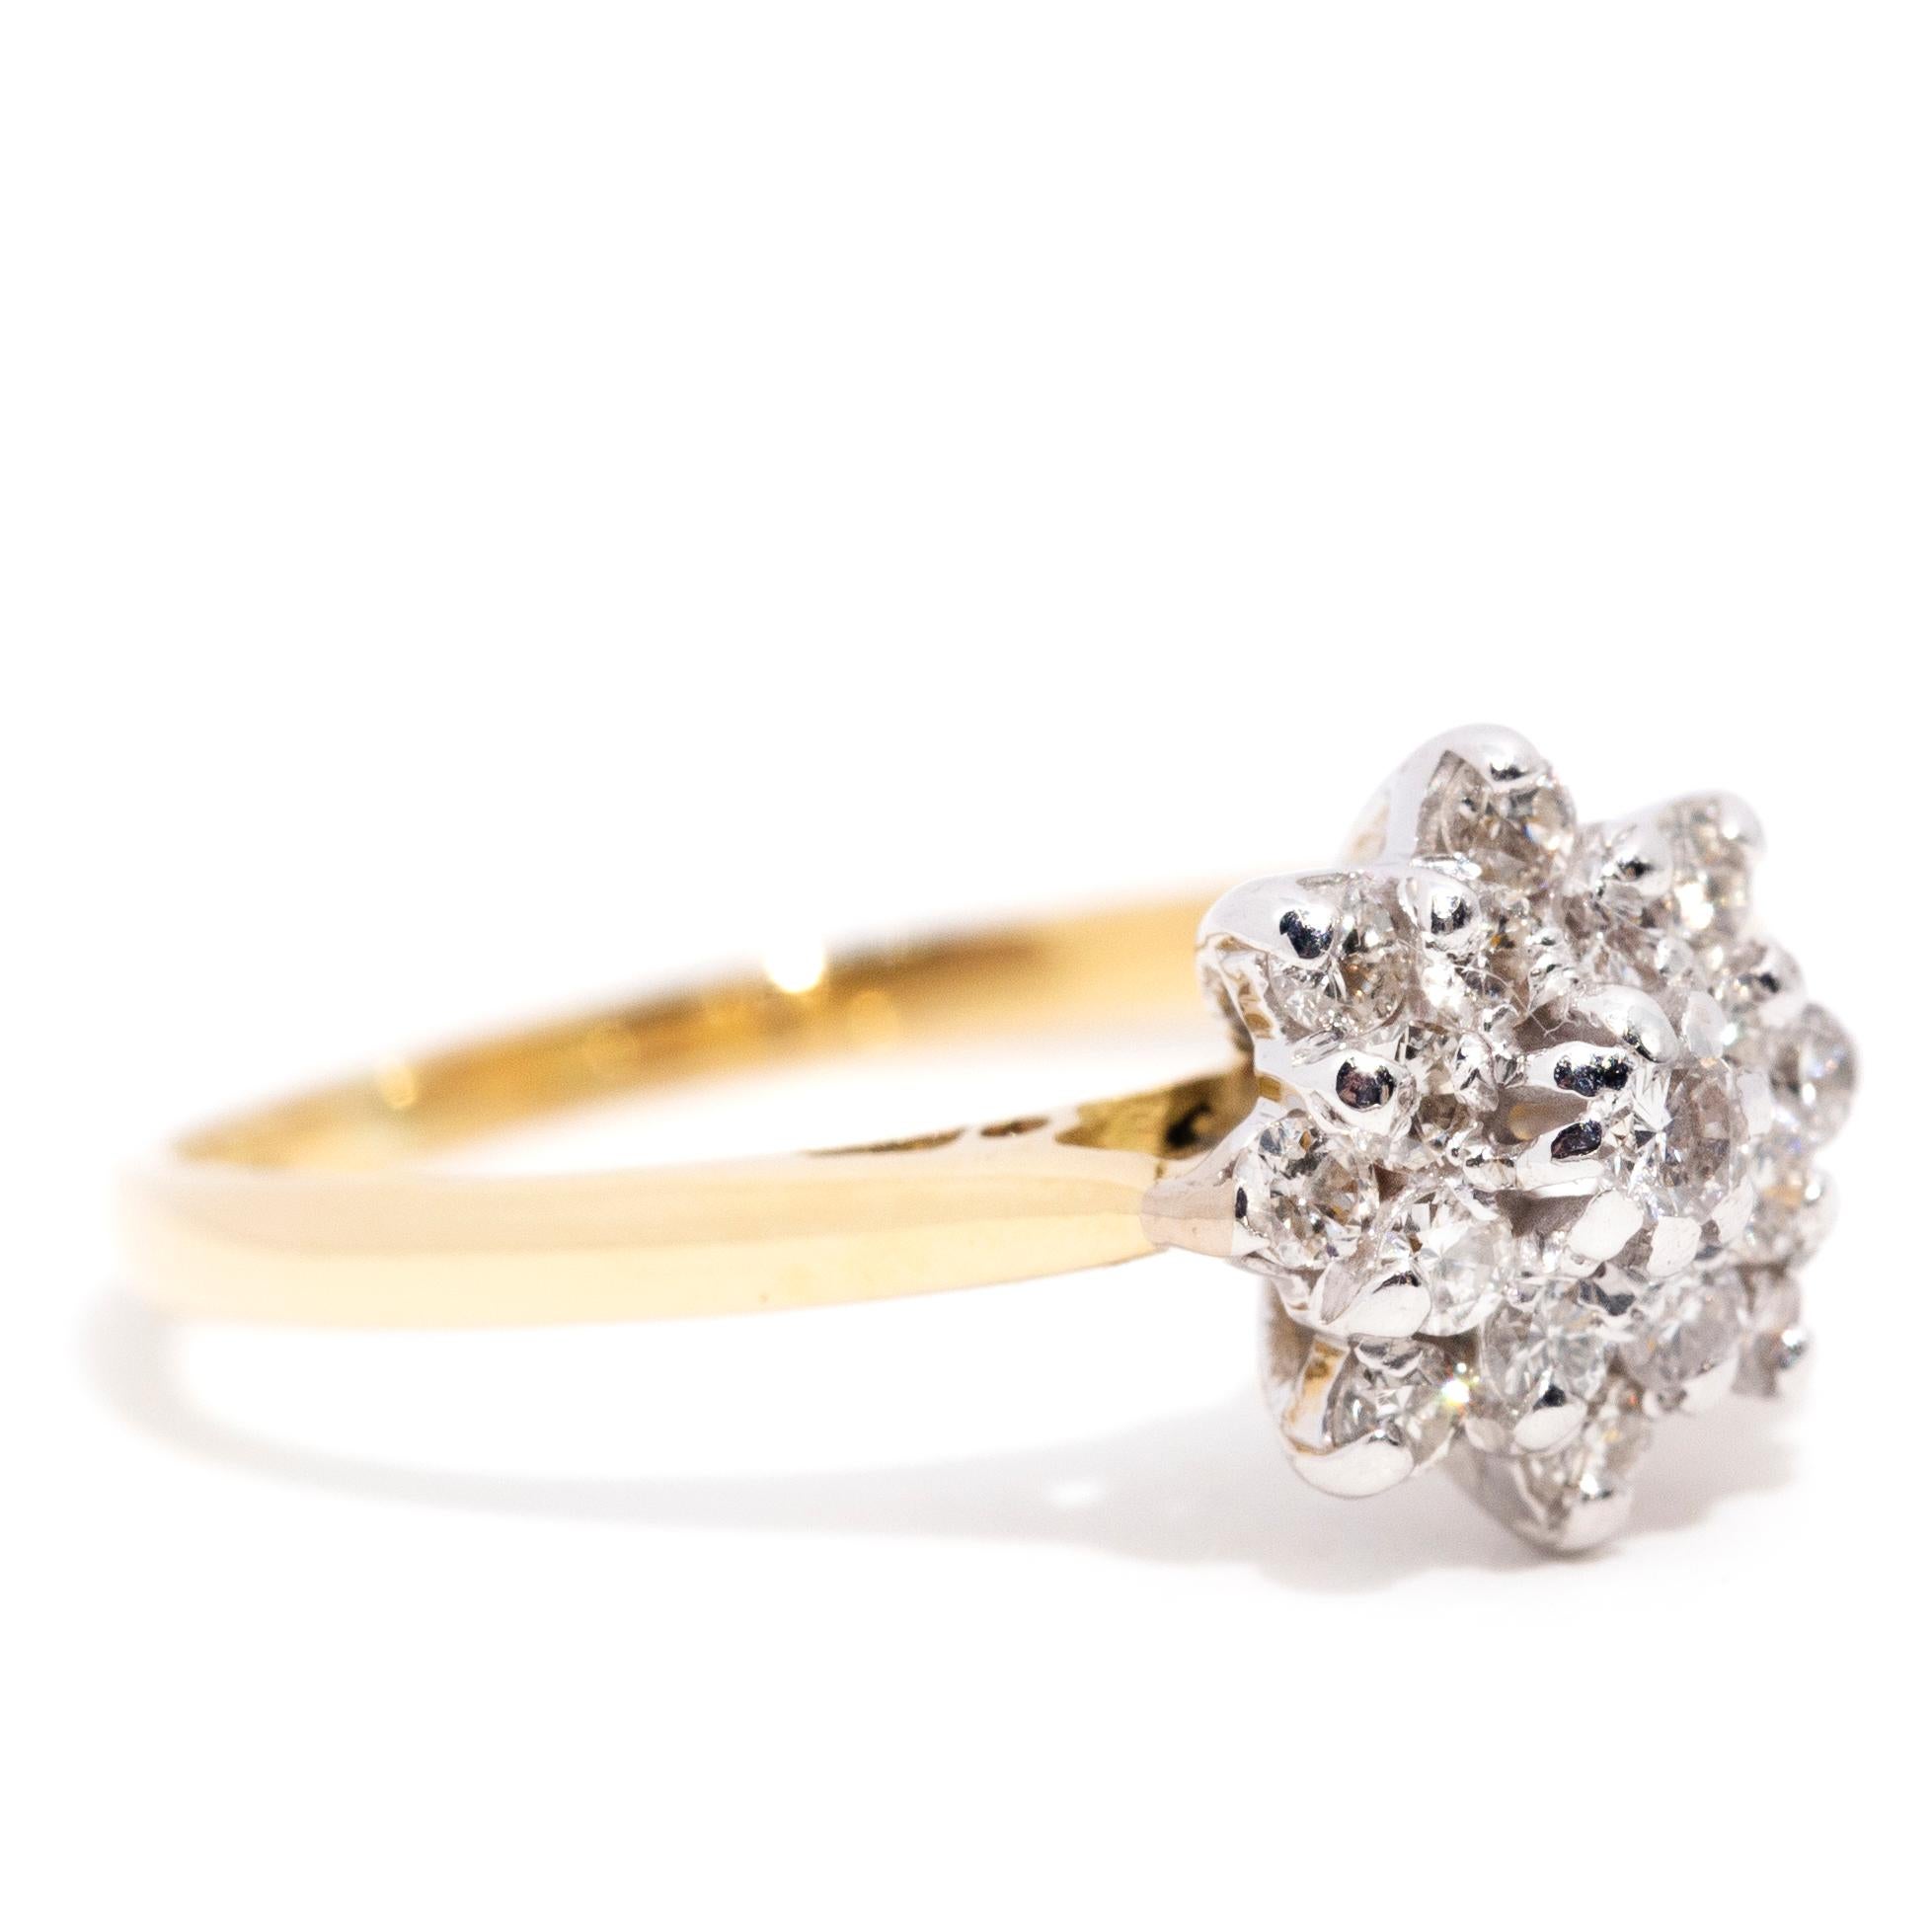 Elegantly crafted in 18 carat yellow gold, this lovely vintage cluster ring is a delight. A high polish band moves into tapered shoulders holding a shimmering starburst cluster. At the centre of the cluster is a sparkling round brilliant diamond